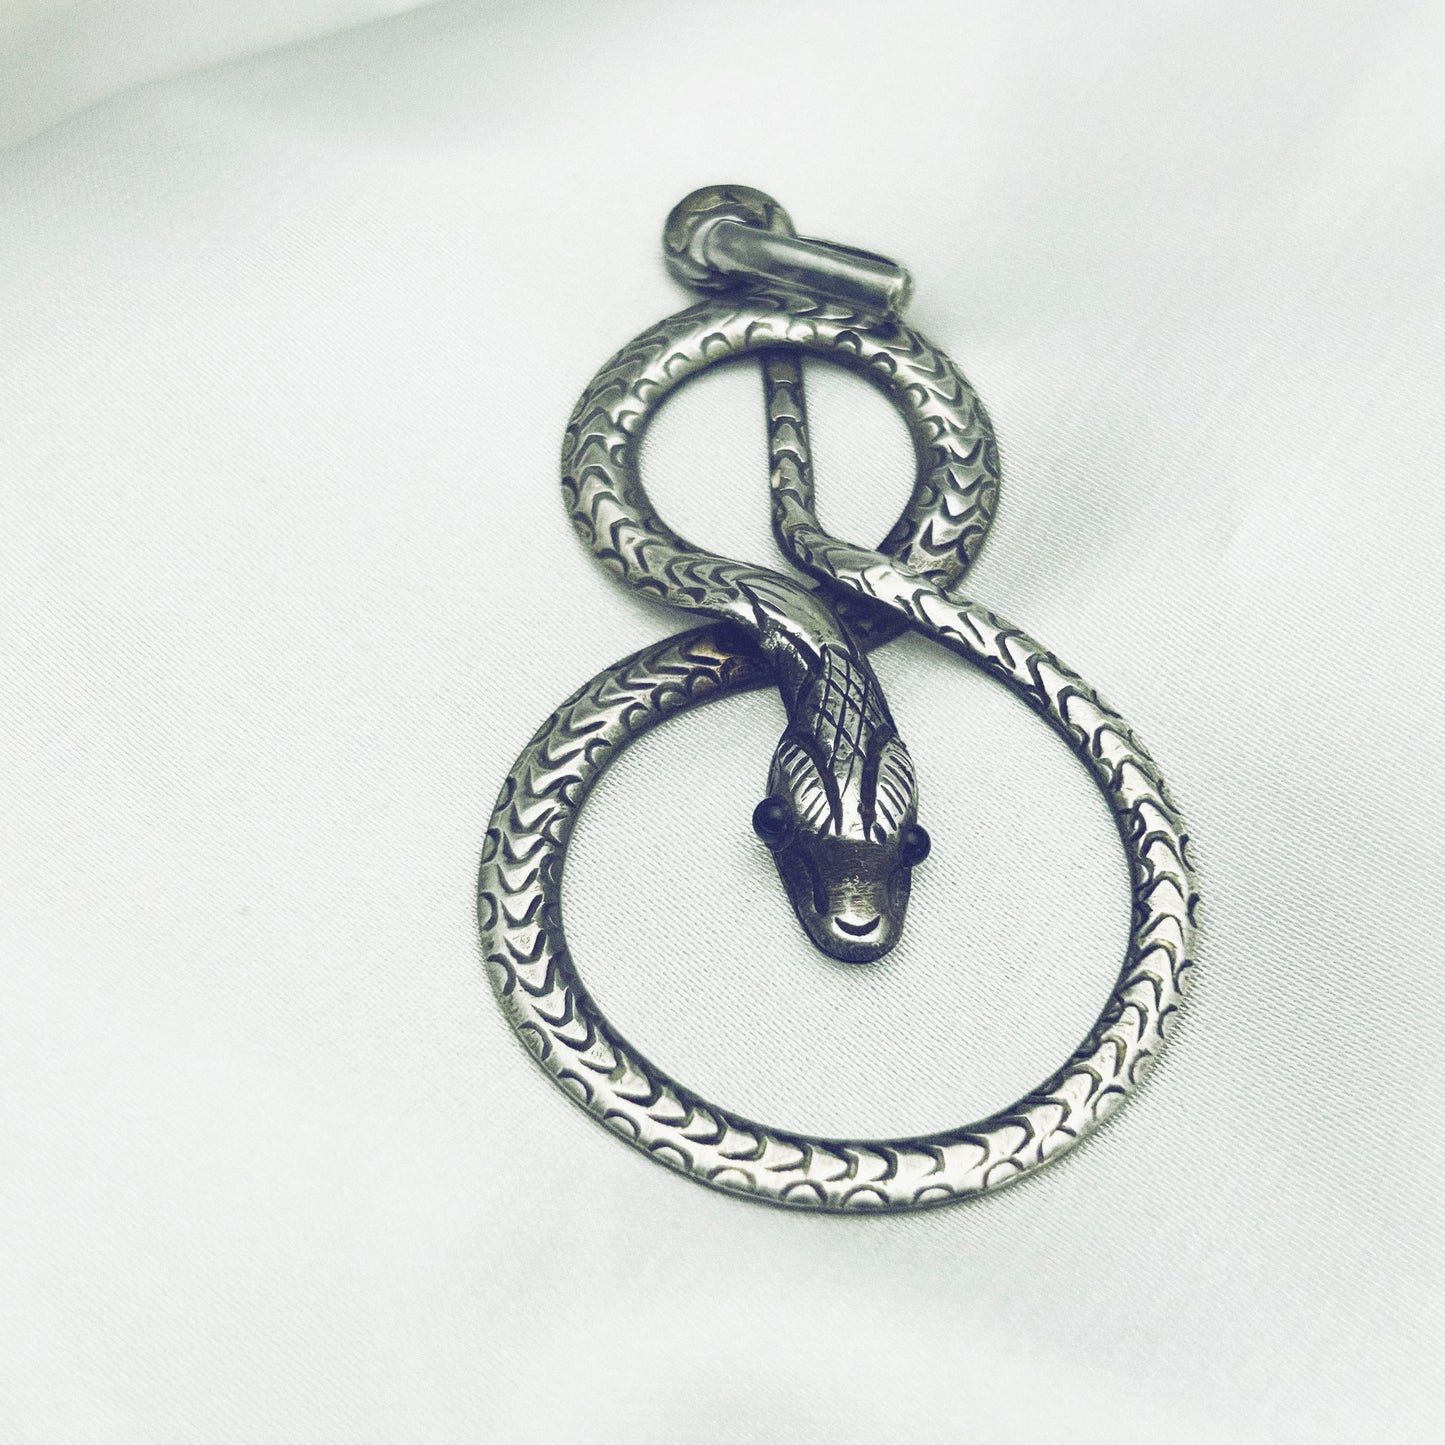 Vintage Serpent Snake with Onyx Eyes Sterling Silver Pendant